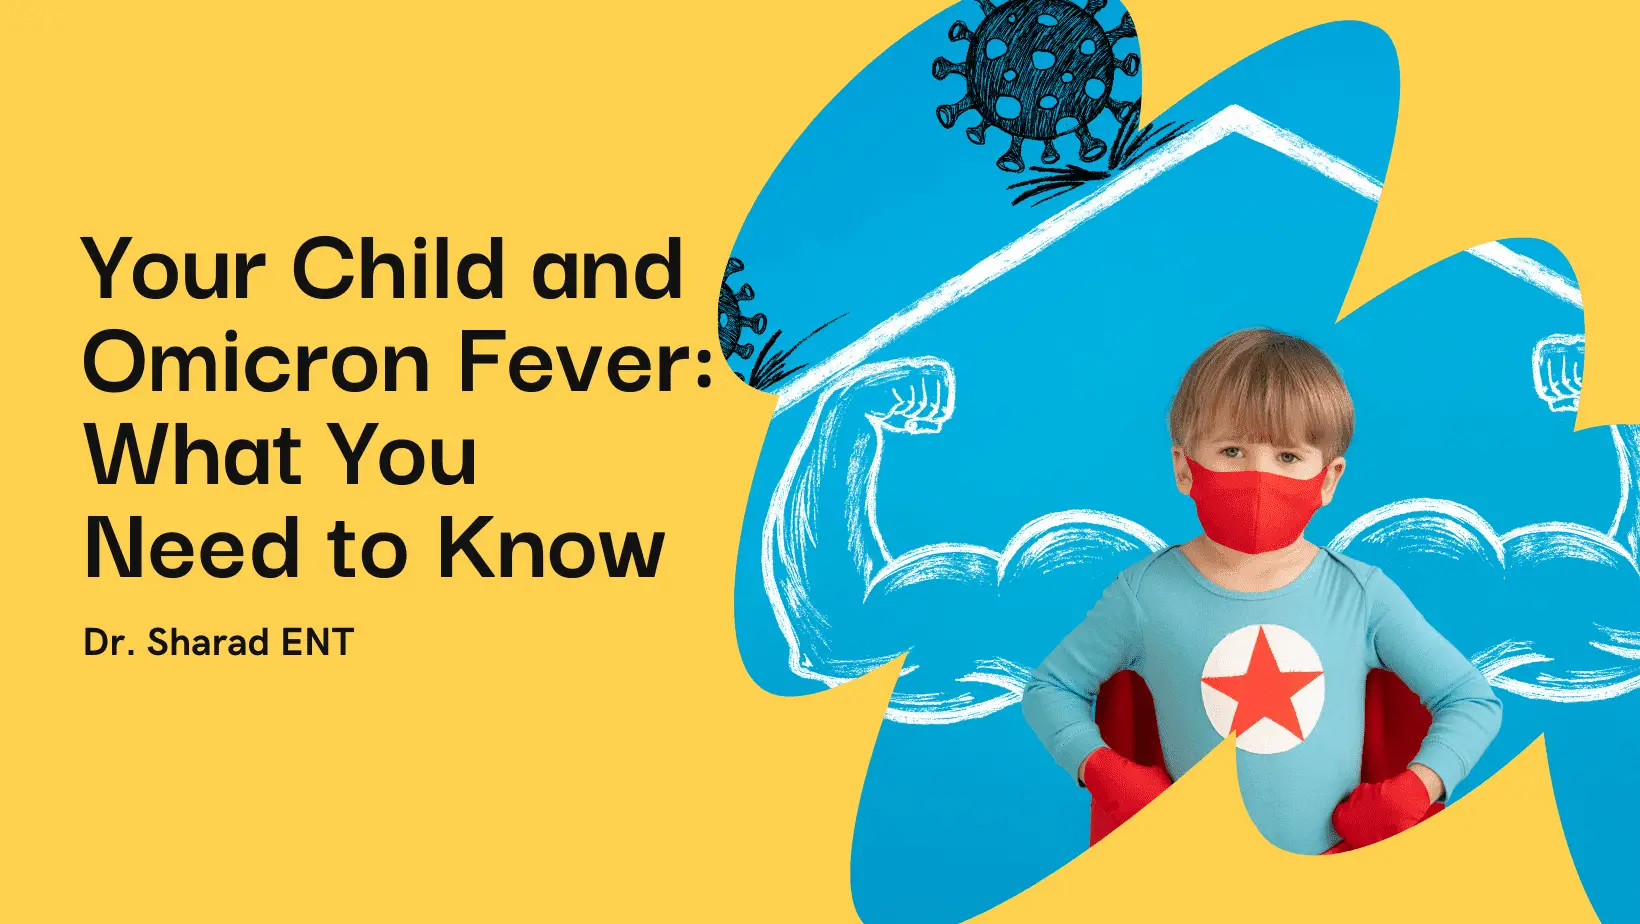 Your Child and Omicron Fever: What to Do